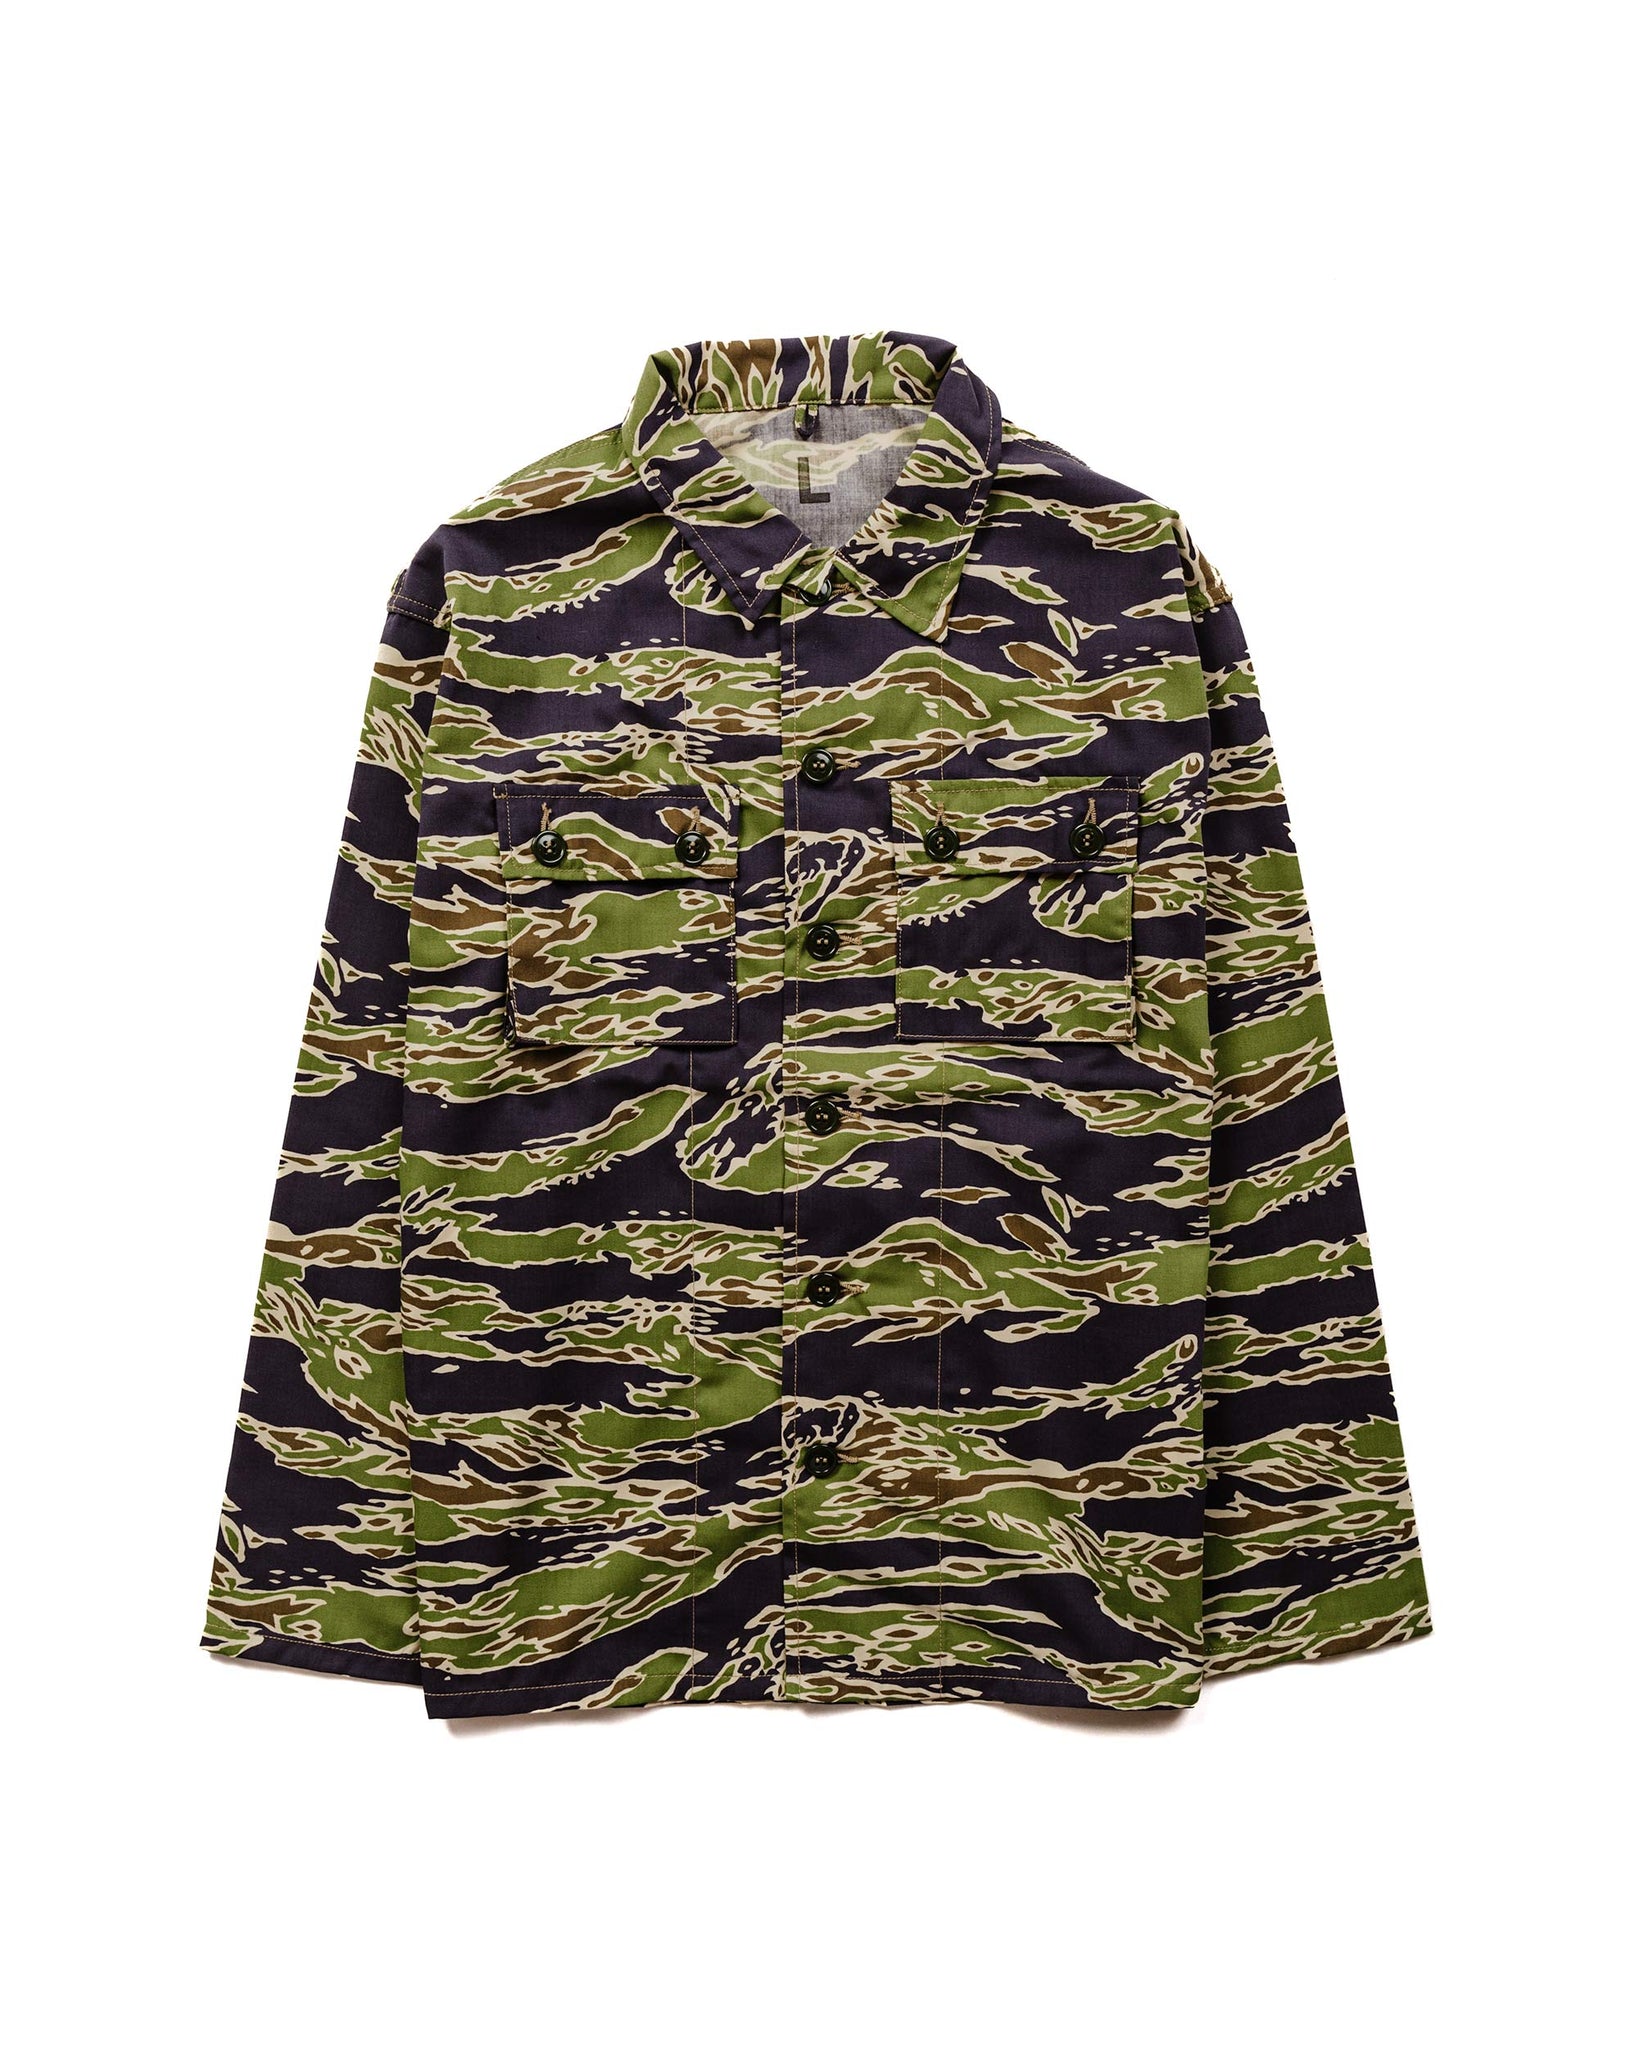 The Real McCoy's MS23002 Tiger Camouflage Shirt / Late War Green